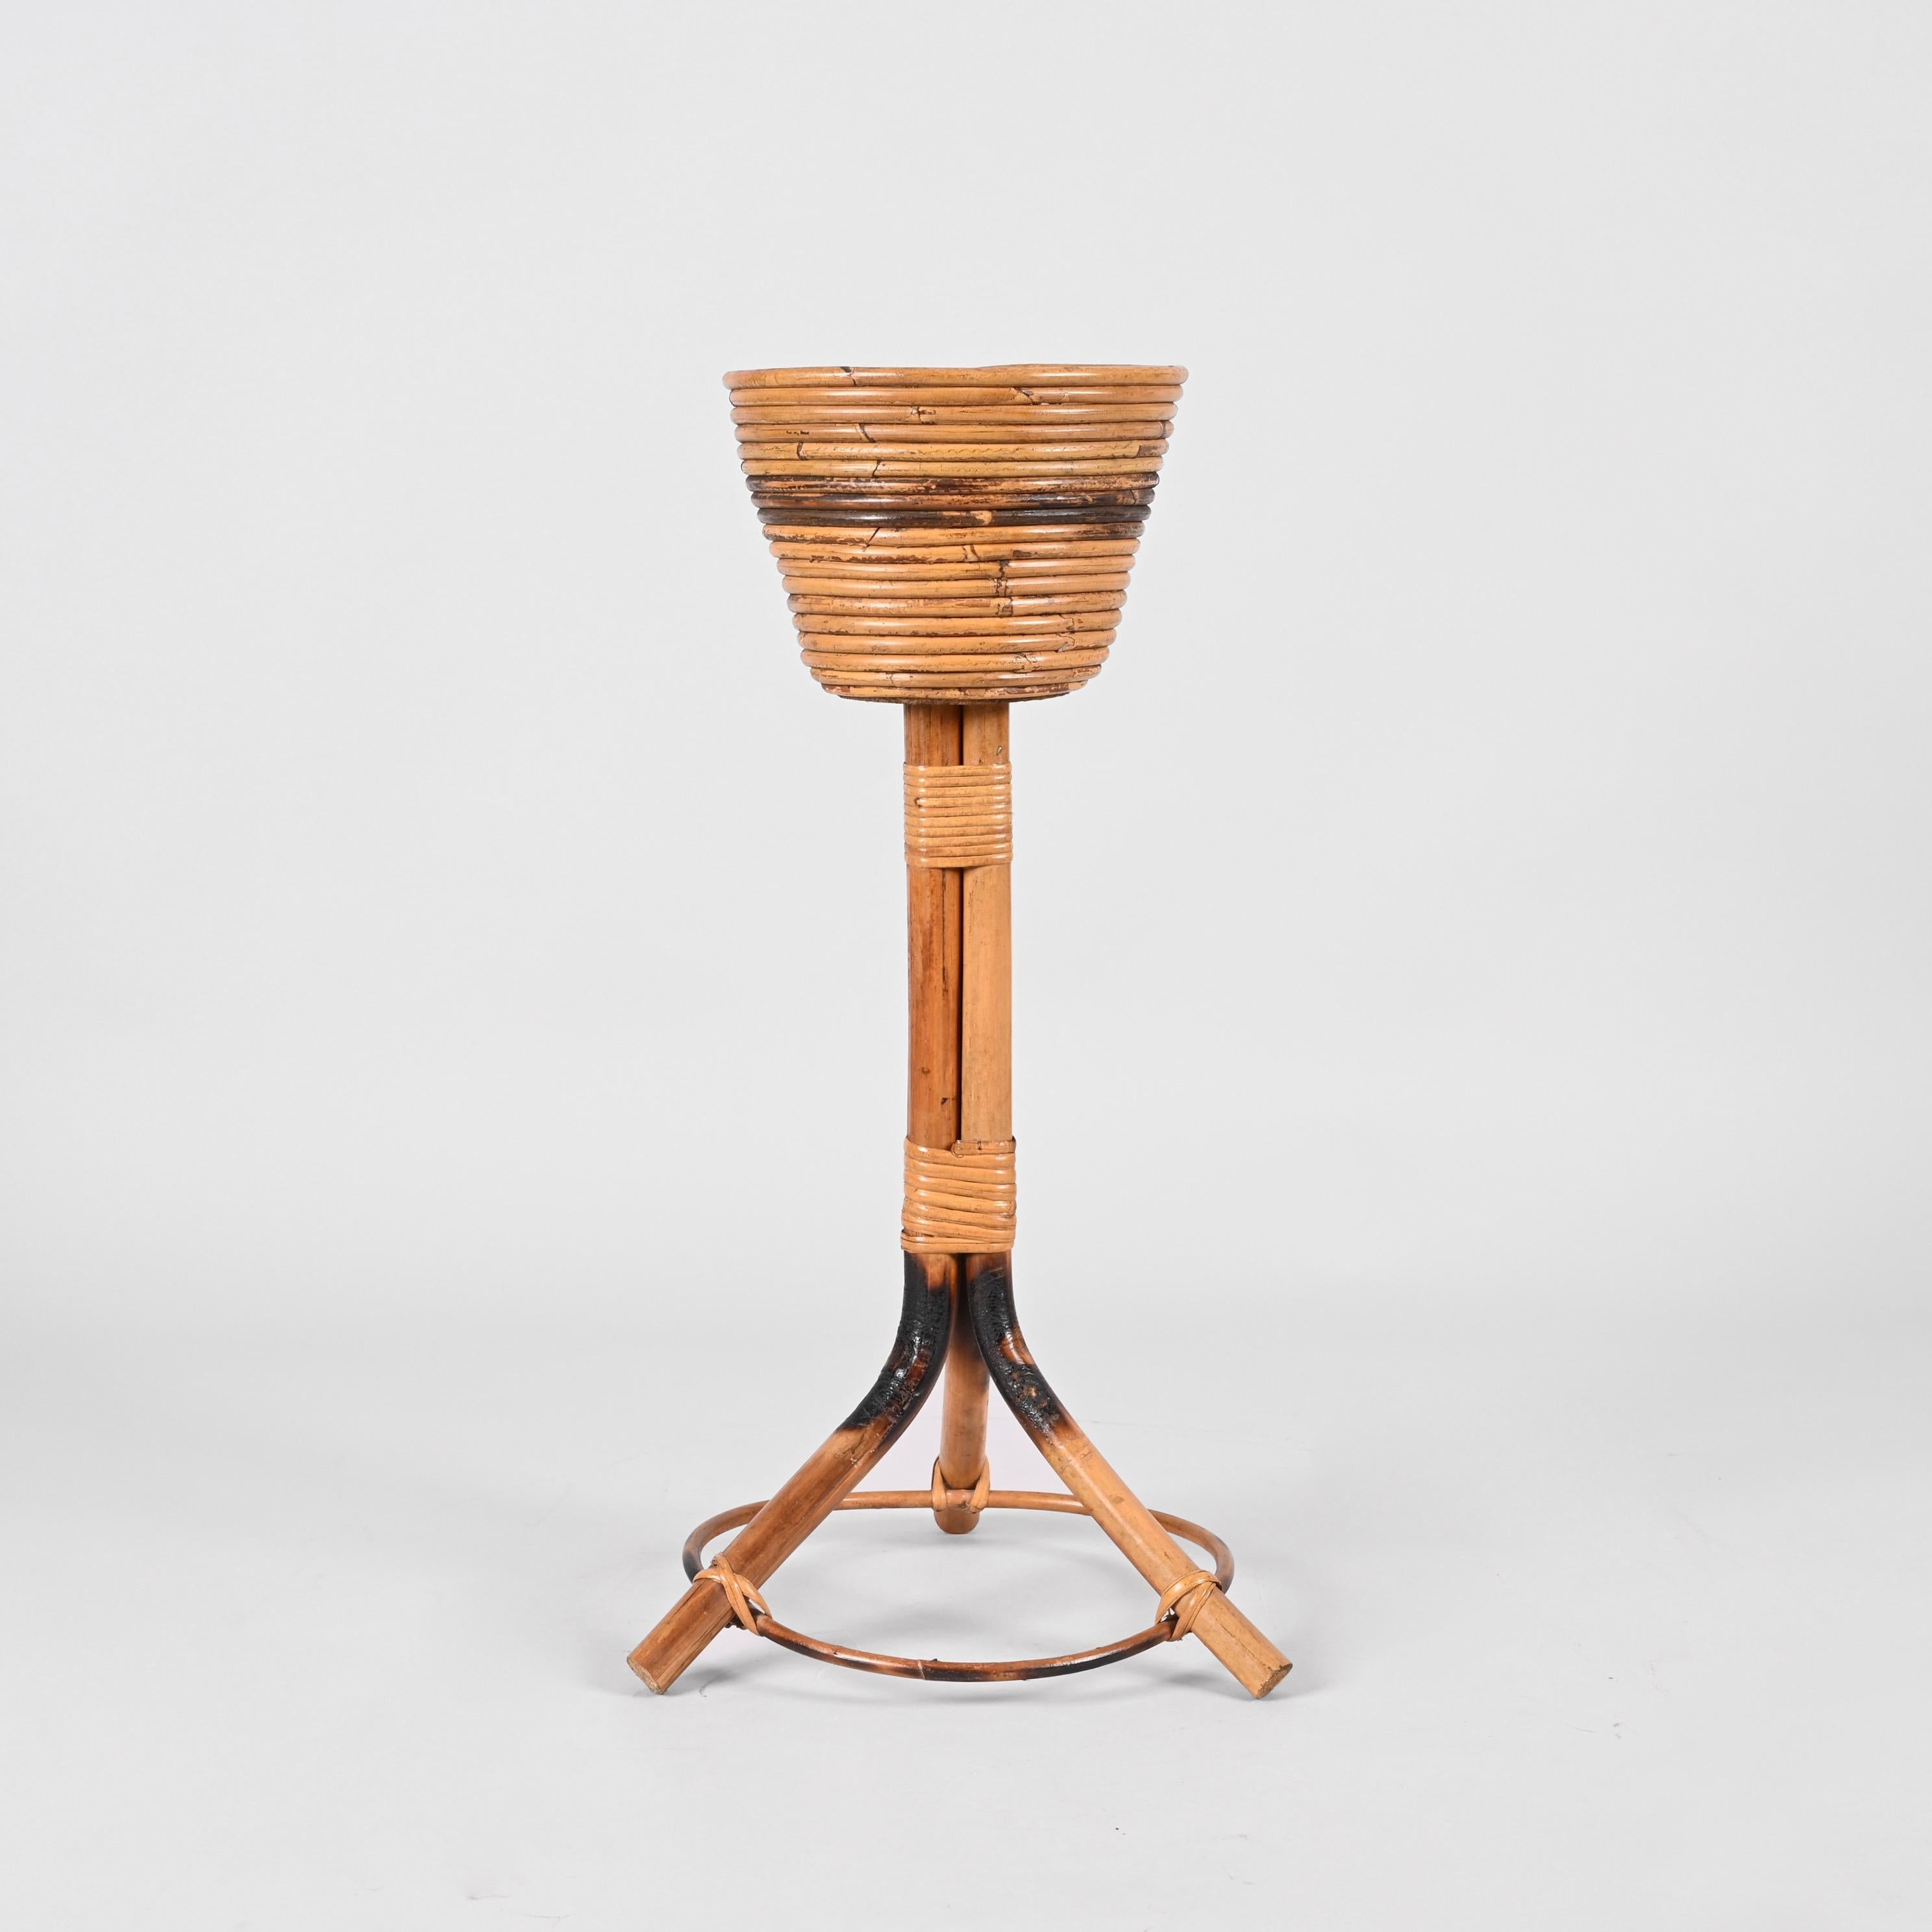 European Midcentury Italian Bamboo Cane and Rattan Round Plant Holder, 1950s For Sale